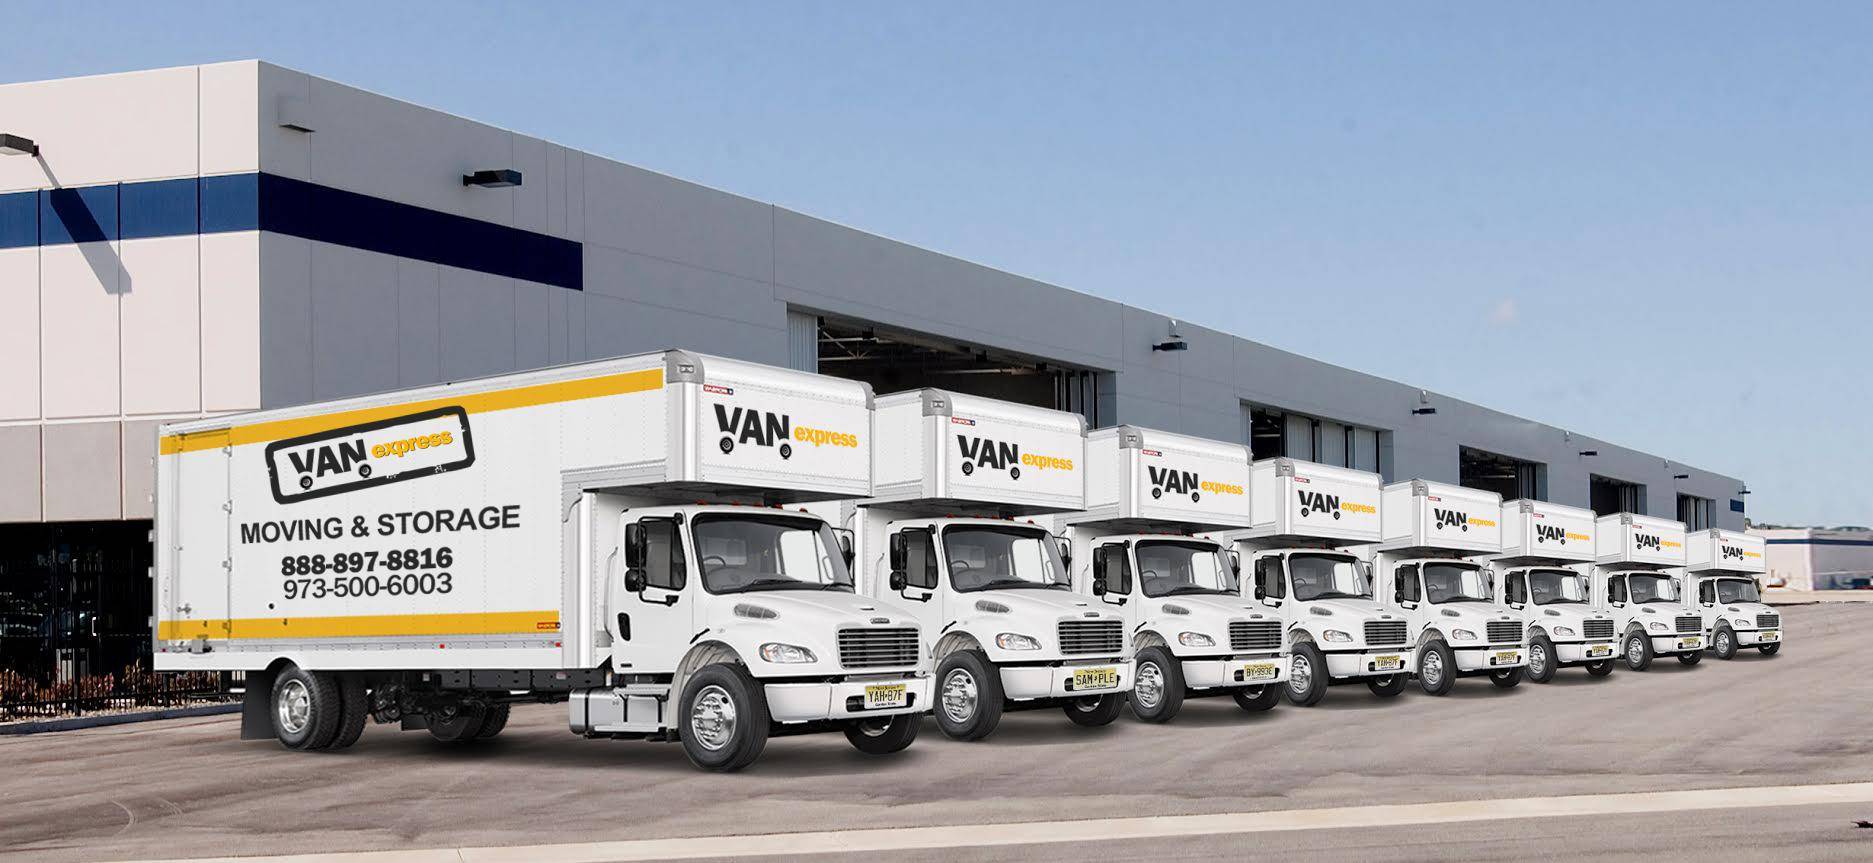 Van Express Moving | 1275 Bloomfield Ave Building 7 Unit 45, Fairfield, NJ 07004, United States | Phone: (973) 500-6003